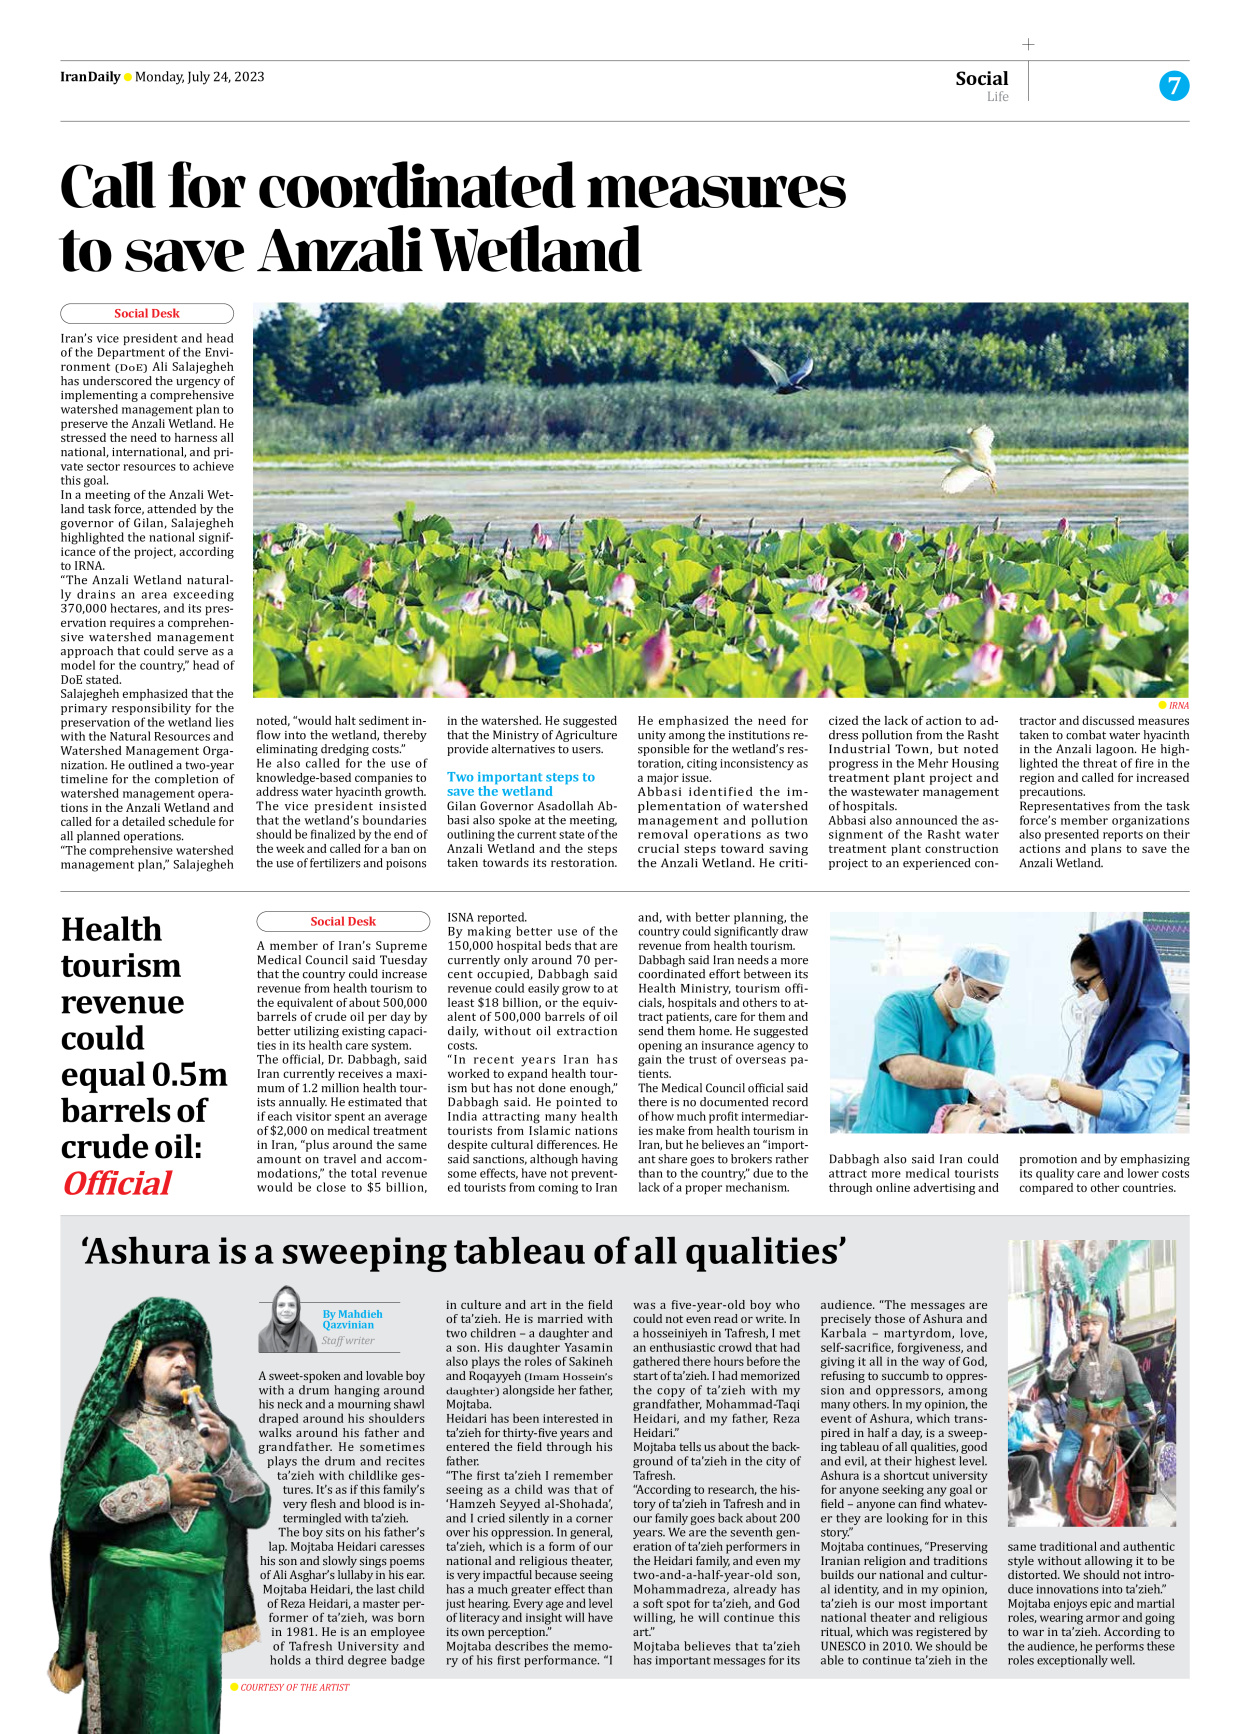 Iran Daily - Number Seven Thousand Three Hundred and Forty Seven - 24 July 2023 - Page 7